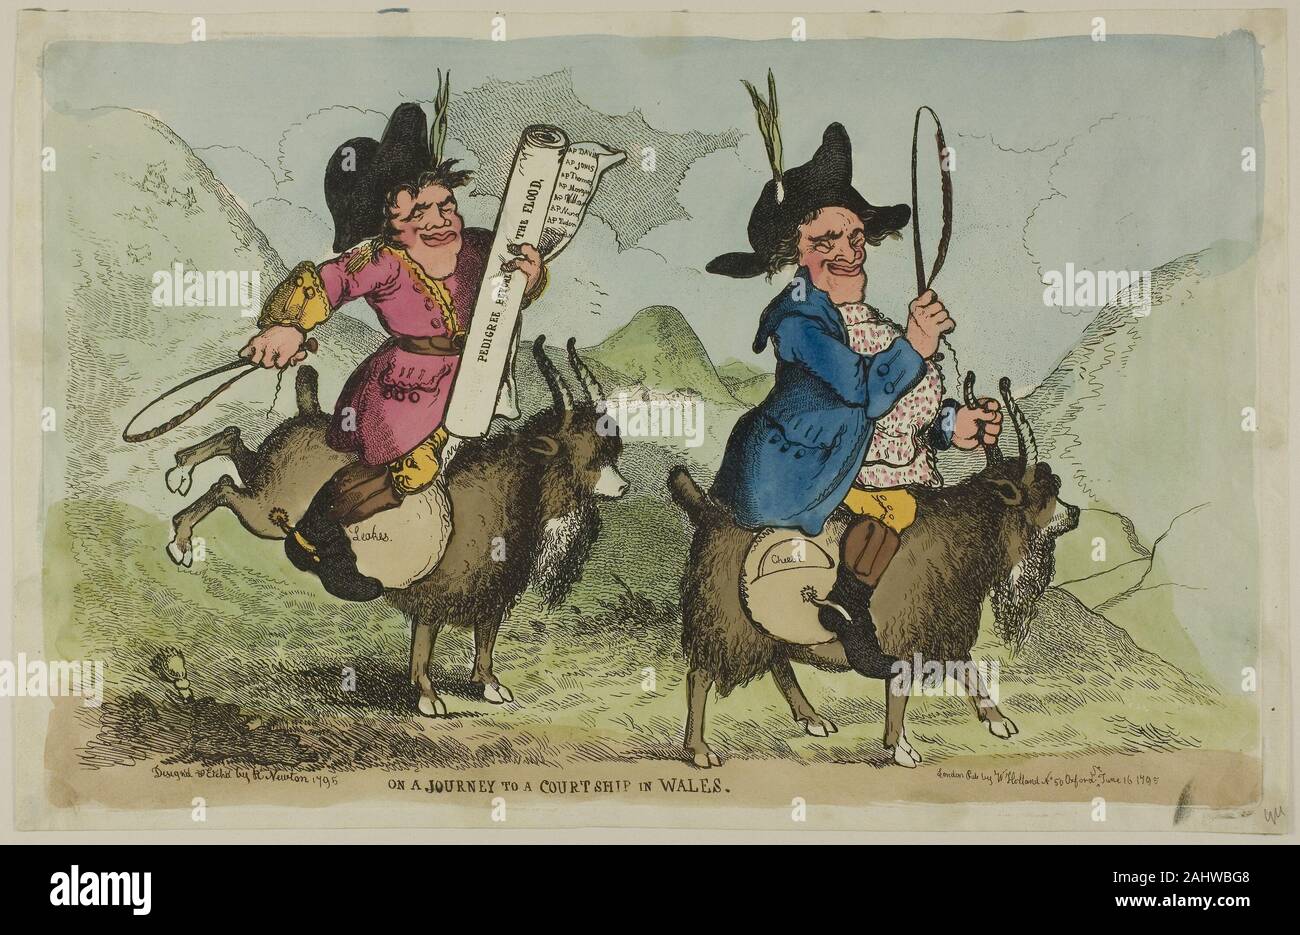 Richard Newton. On a Journey to a Courtship in Wales. 1795. England. Hand-colored etching on paper Stock Photo